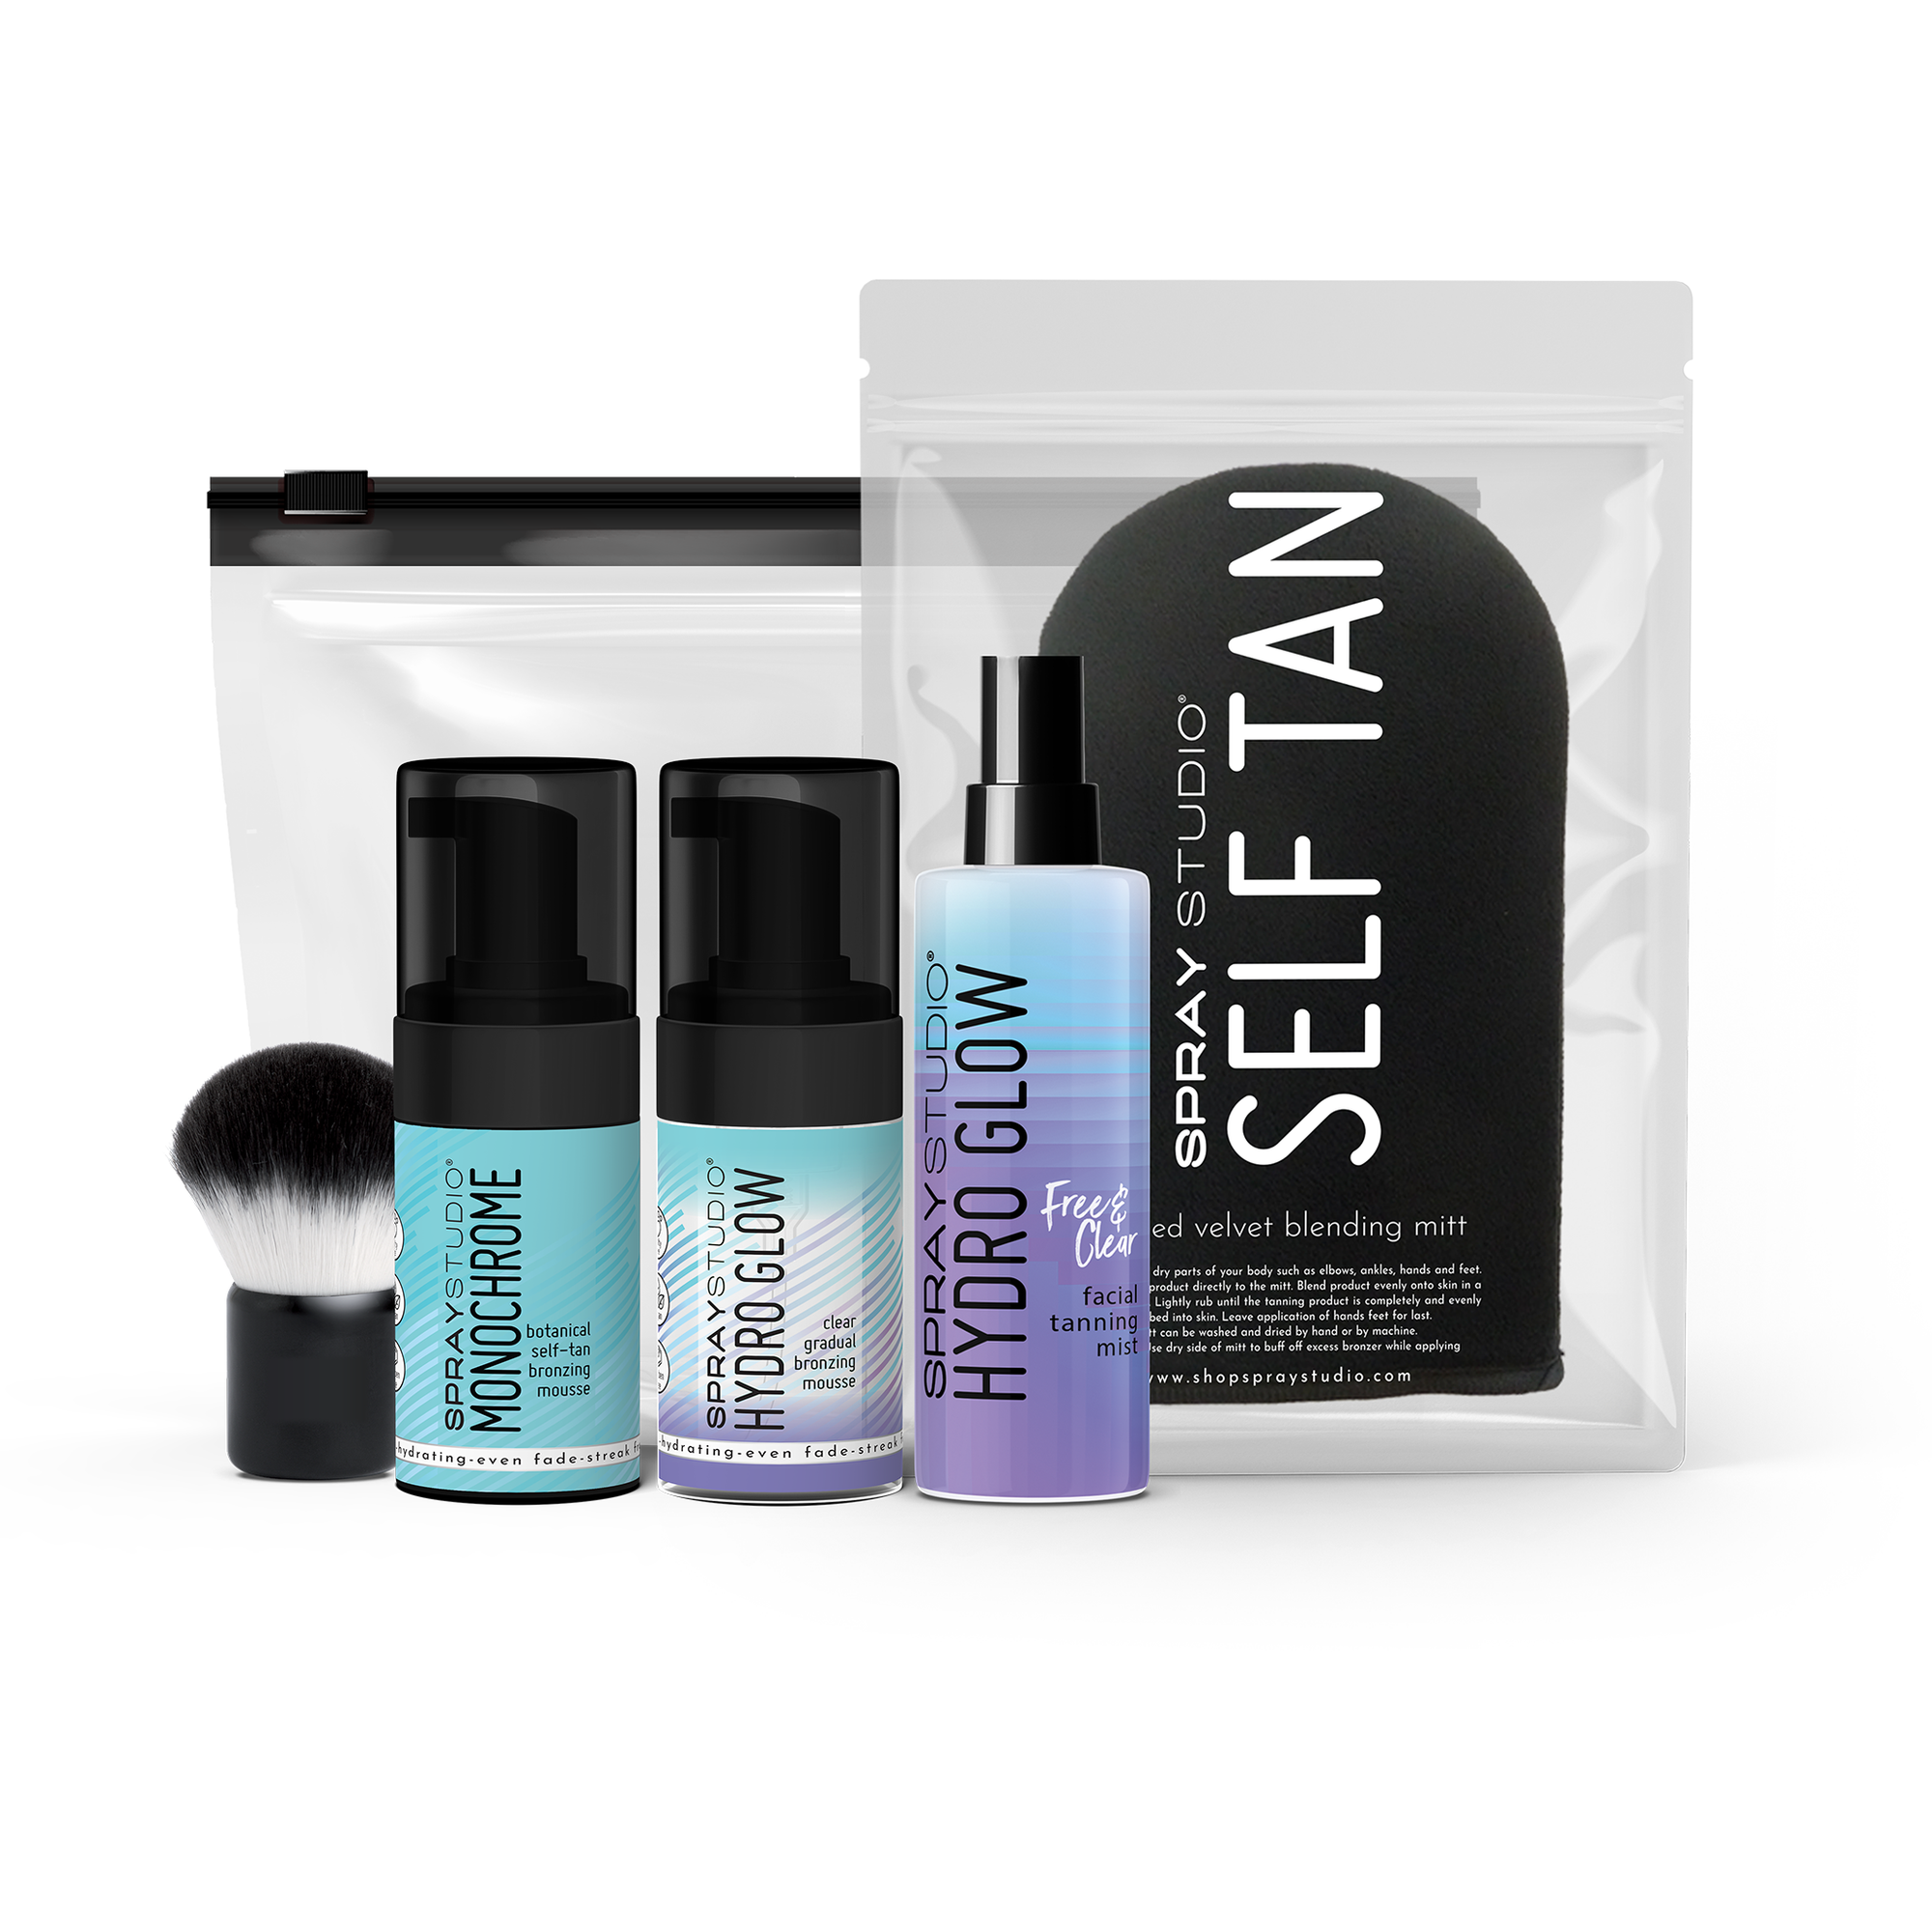 TAN AND TRAVEL KIT - SPRAY STUDIO® | sunless tanning and body care